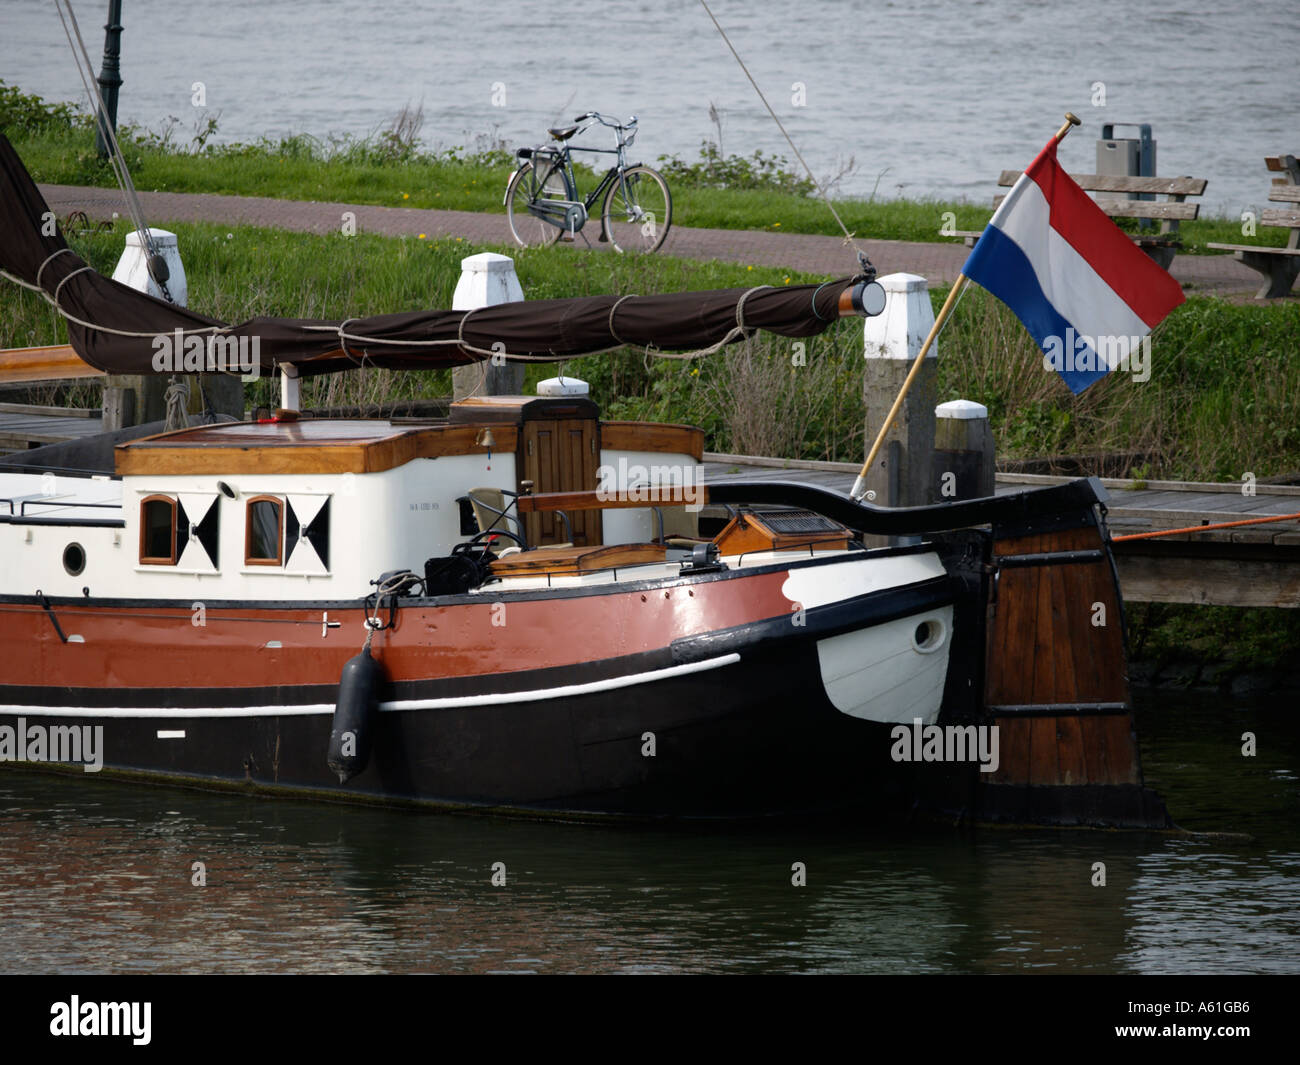 Stern of a typical Dutch flat bottom sailing ship at a dike in Woudrichem with waving Dutch flag and a bicycle parked nearby Stock Photo